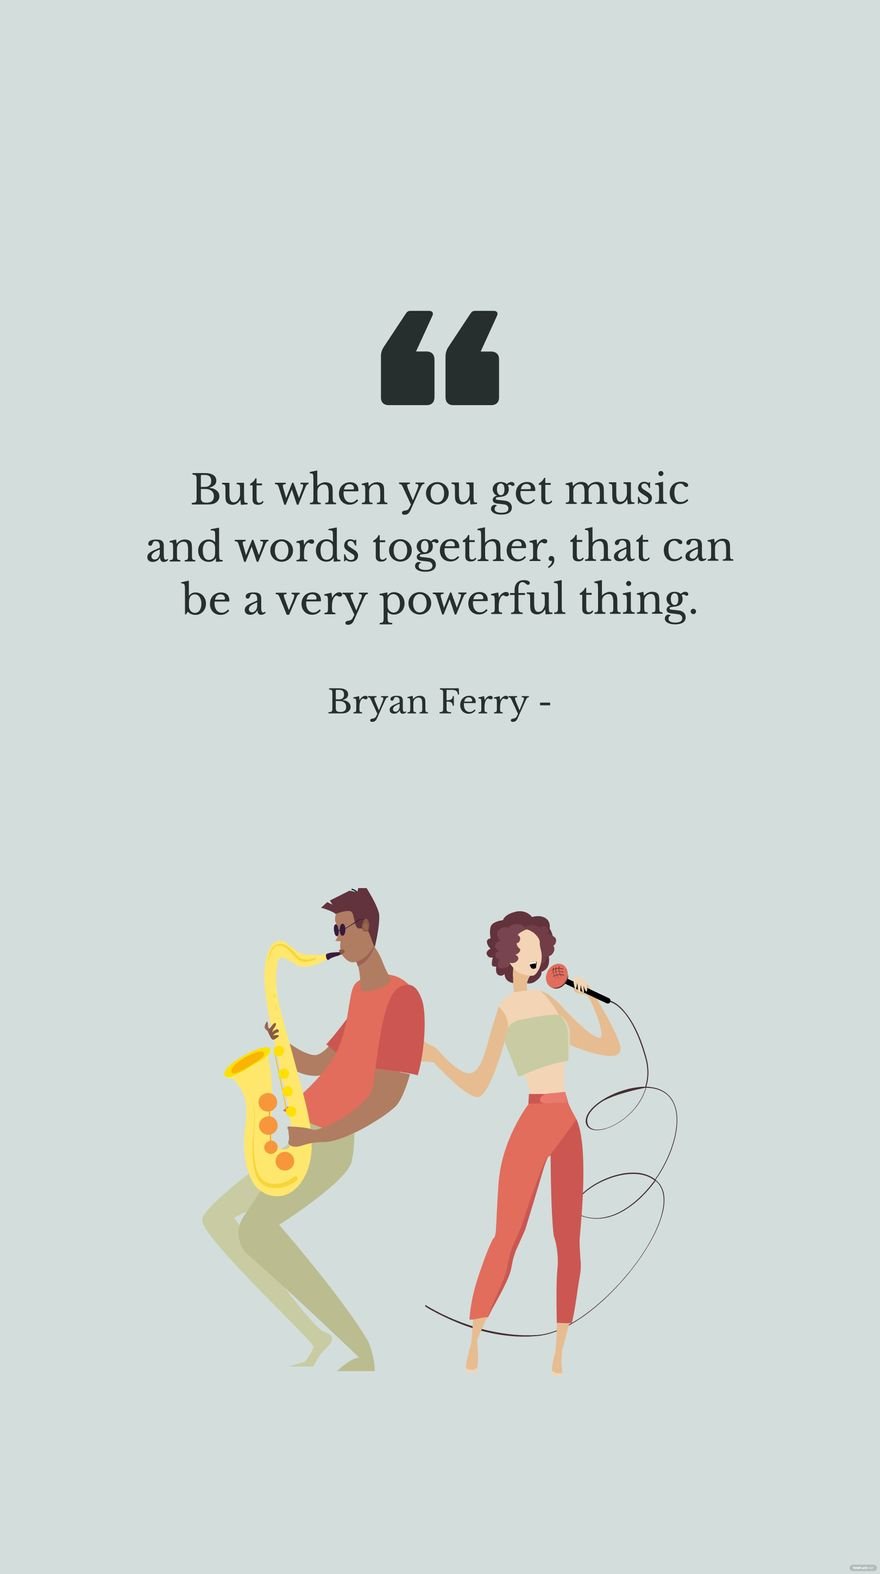 Bryan Ferry - But when you get music and words together, that can be a very powerful thing.